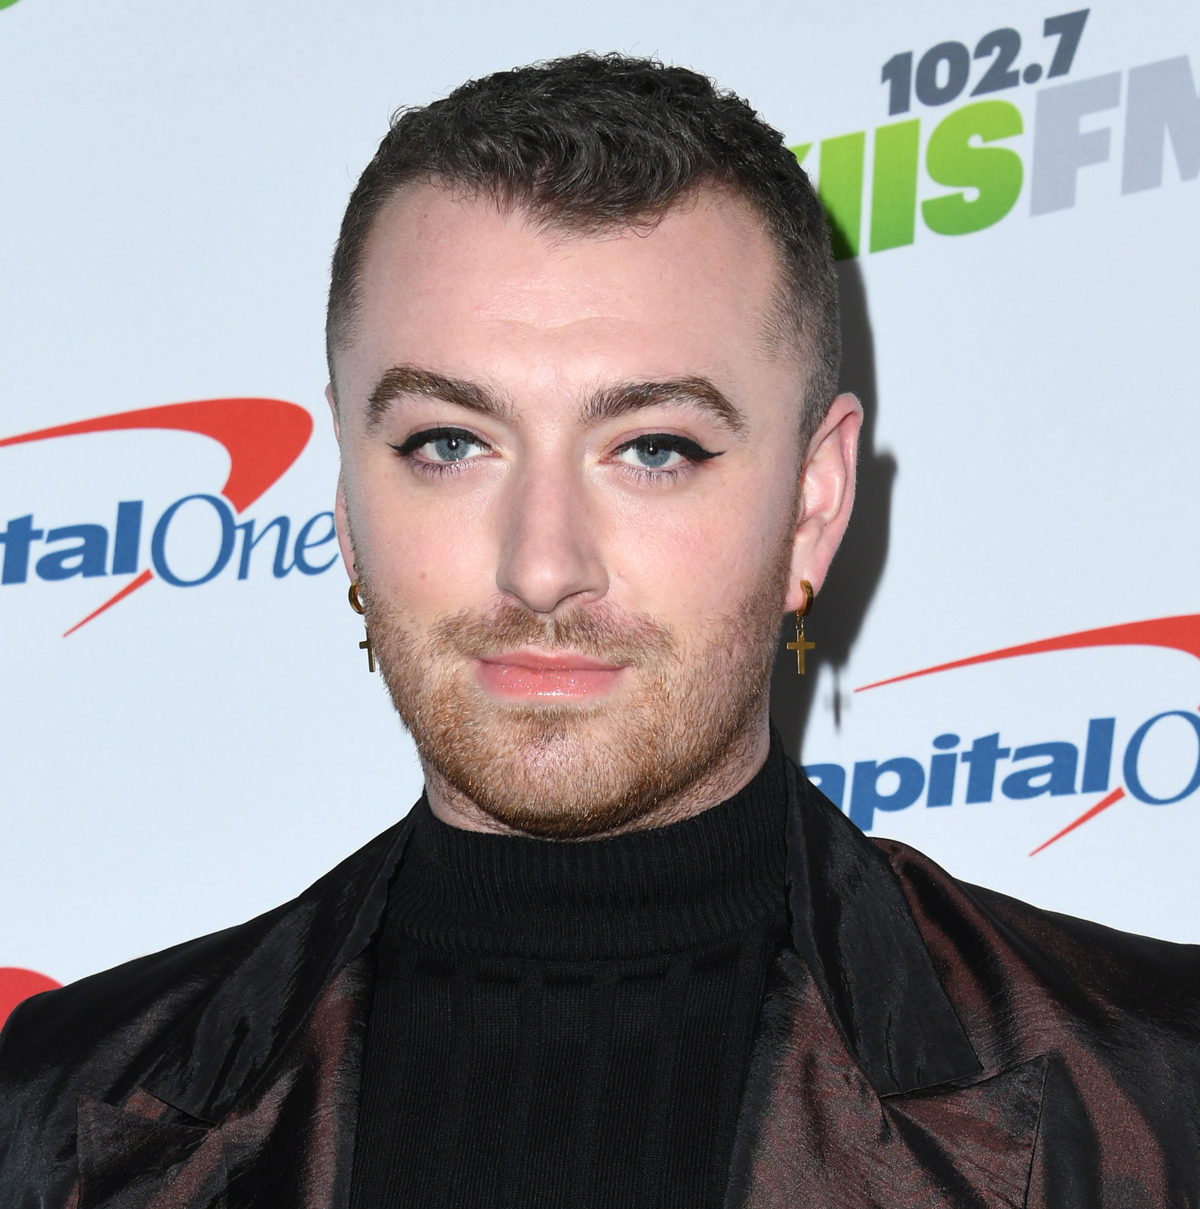 Sam Smith Shows "How Little They Care" in "Diamonds" Music Video